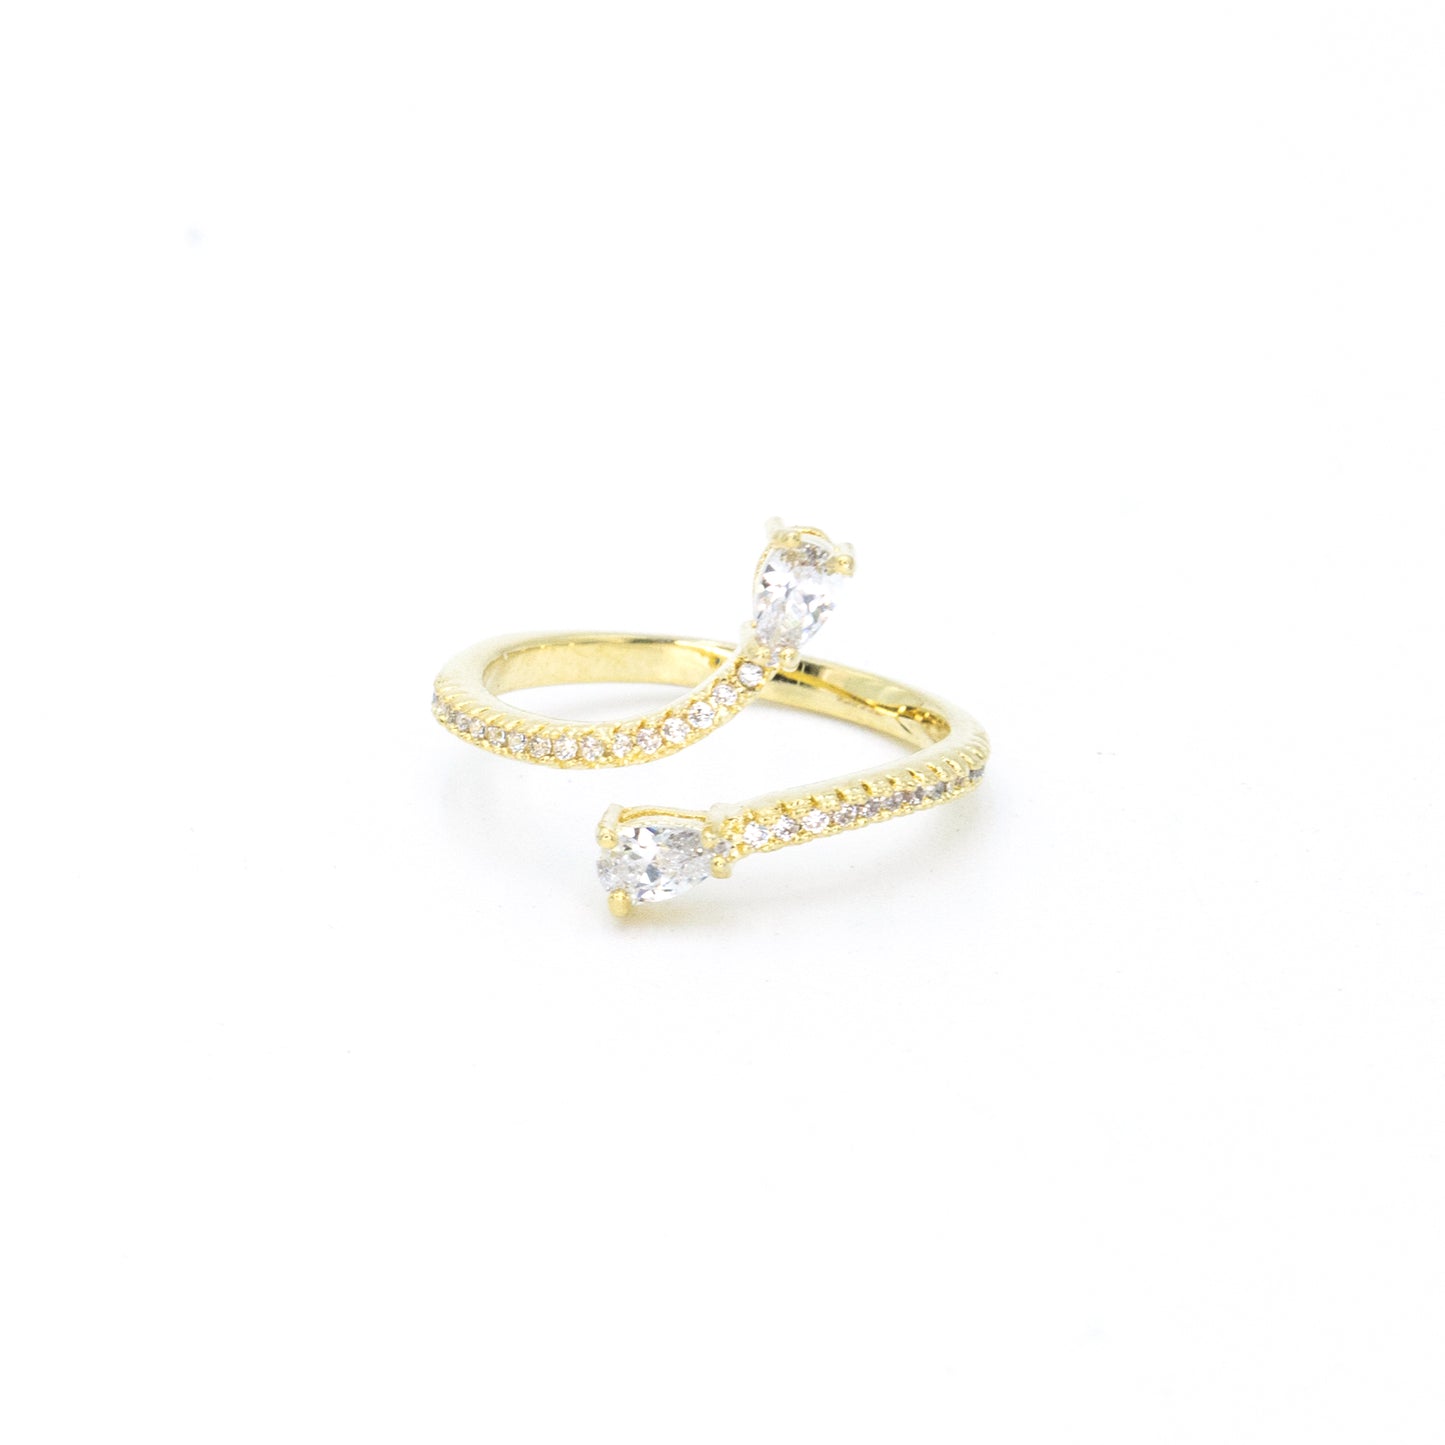 Tiny adjustable snake ring w/ 3A CZ stones rhodium G plated